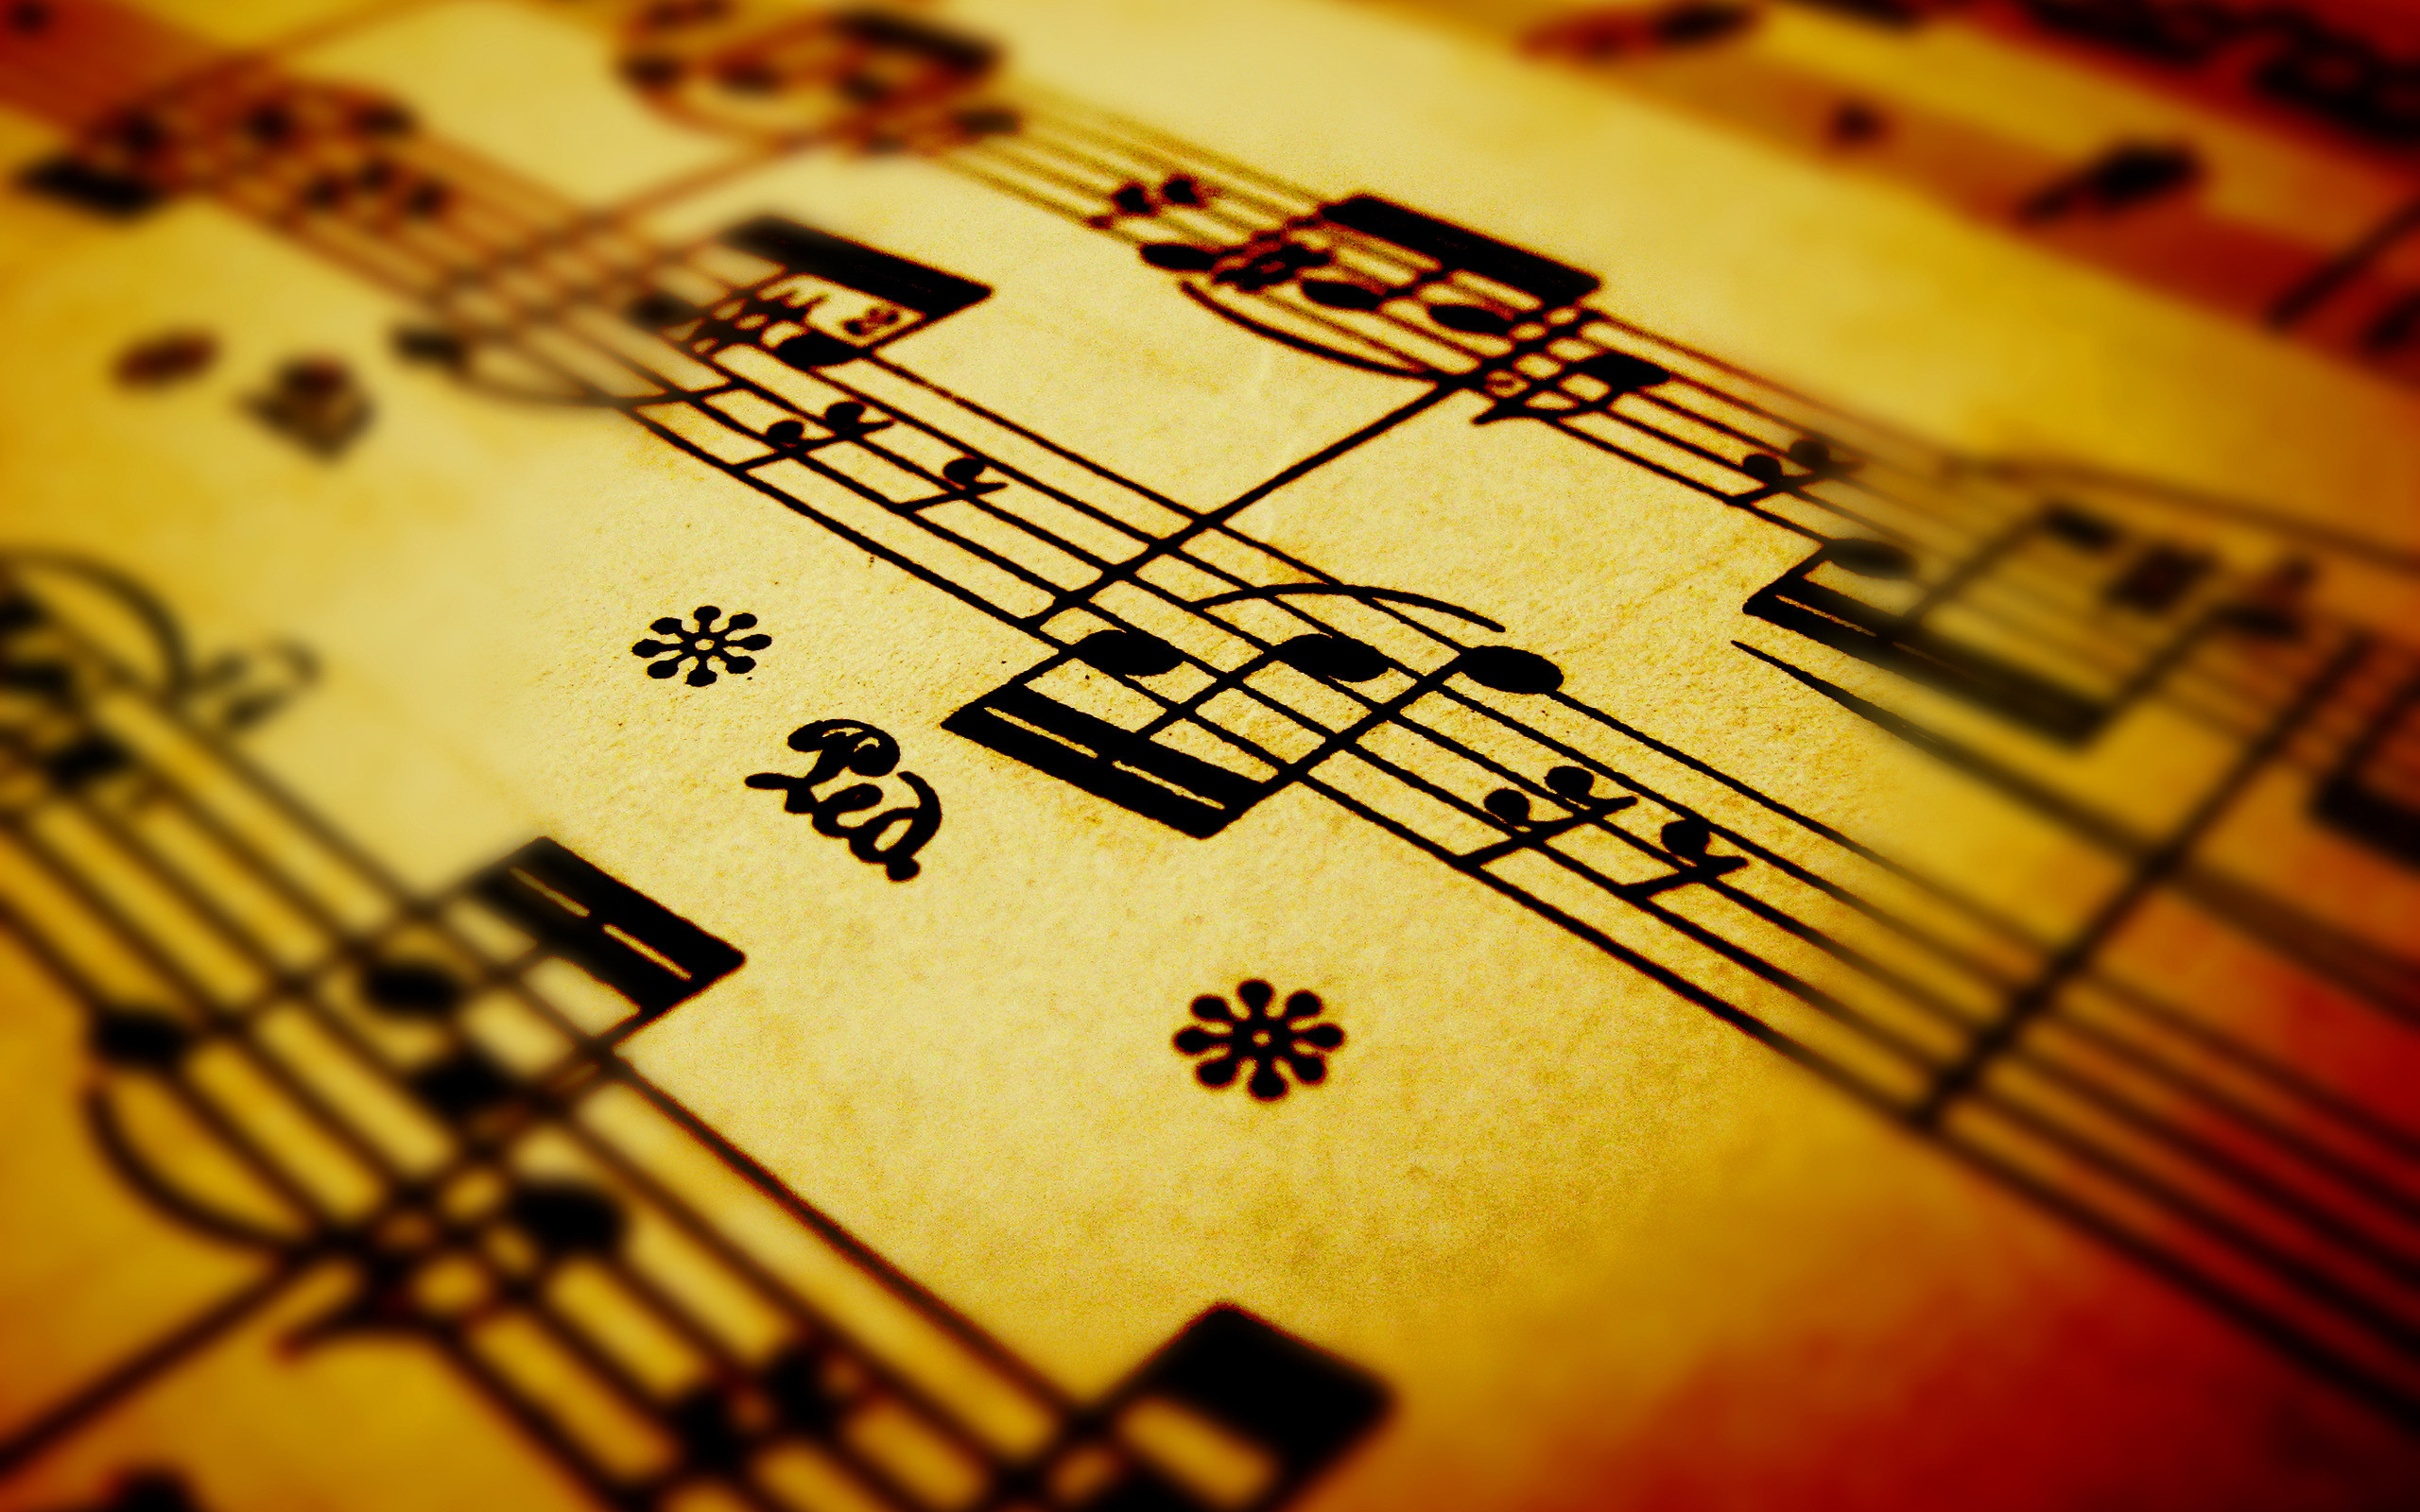 2560x1600, Music Note Wallpapers - High Quality Images Music - HD Wallpaper 